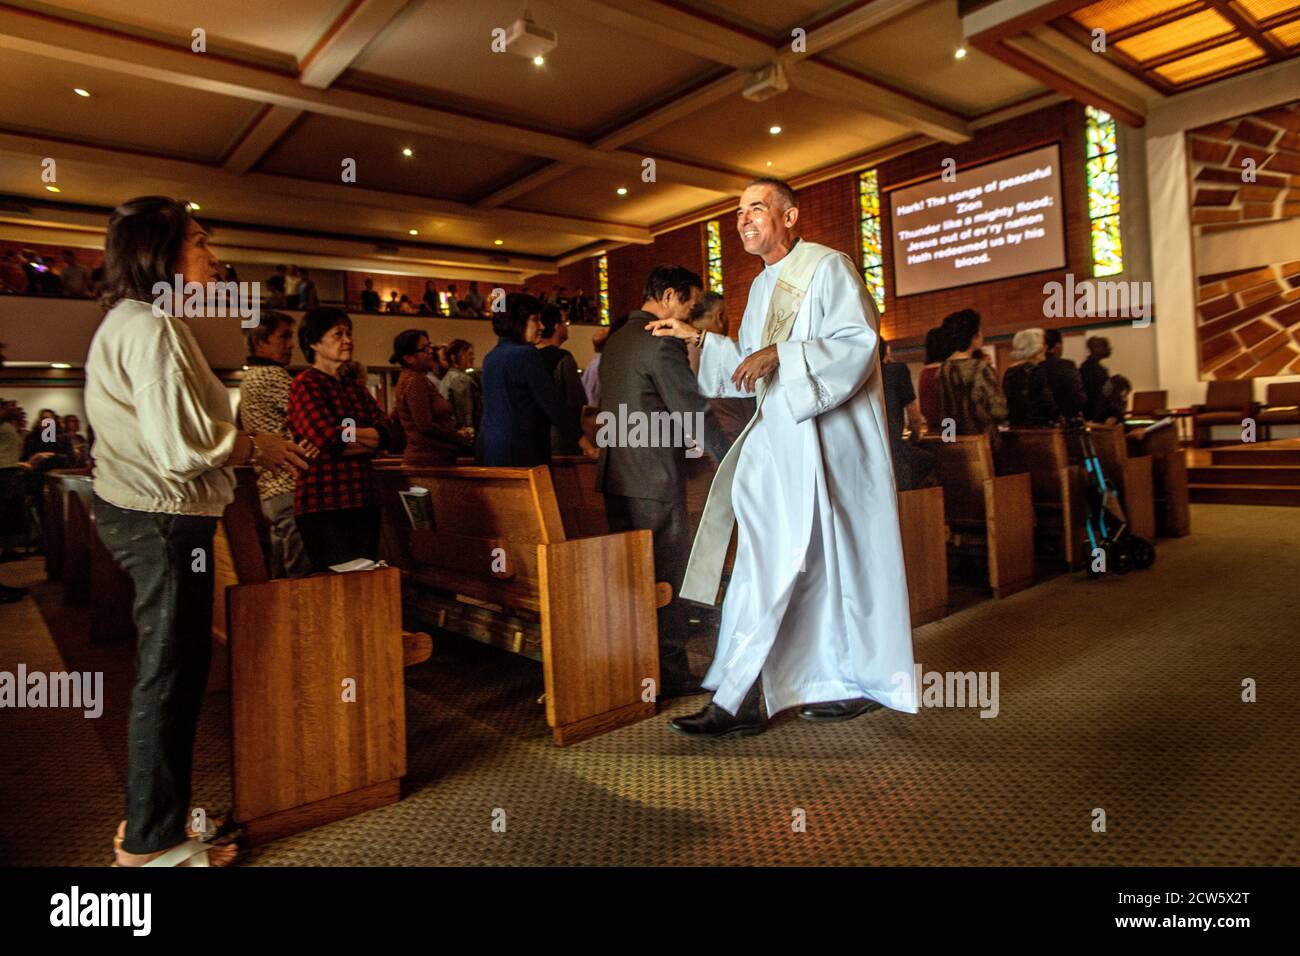 A friendly deacon welcomes an arriving parishioner at mass in a Southern California Catholic church. Stock Photo